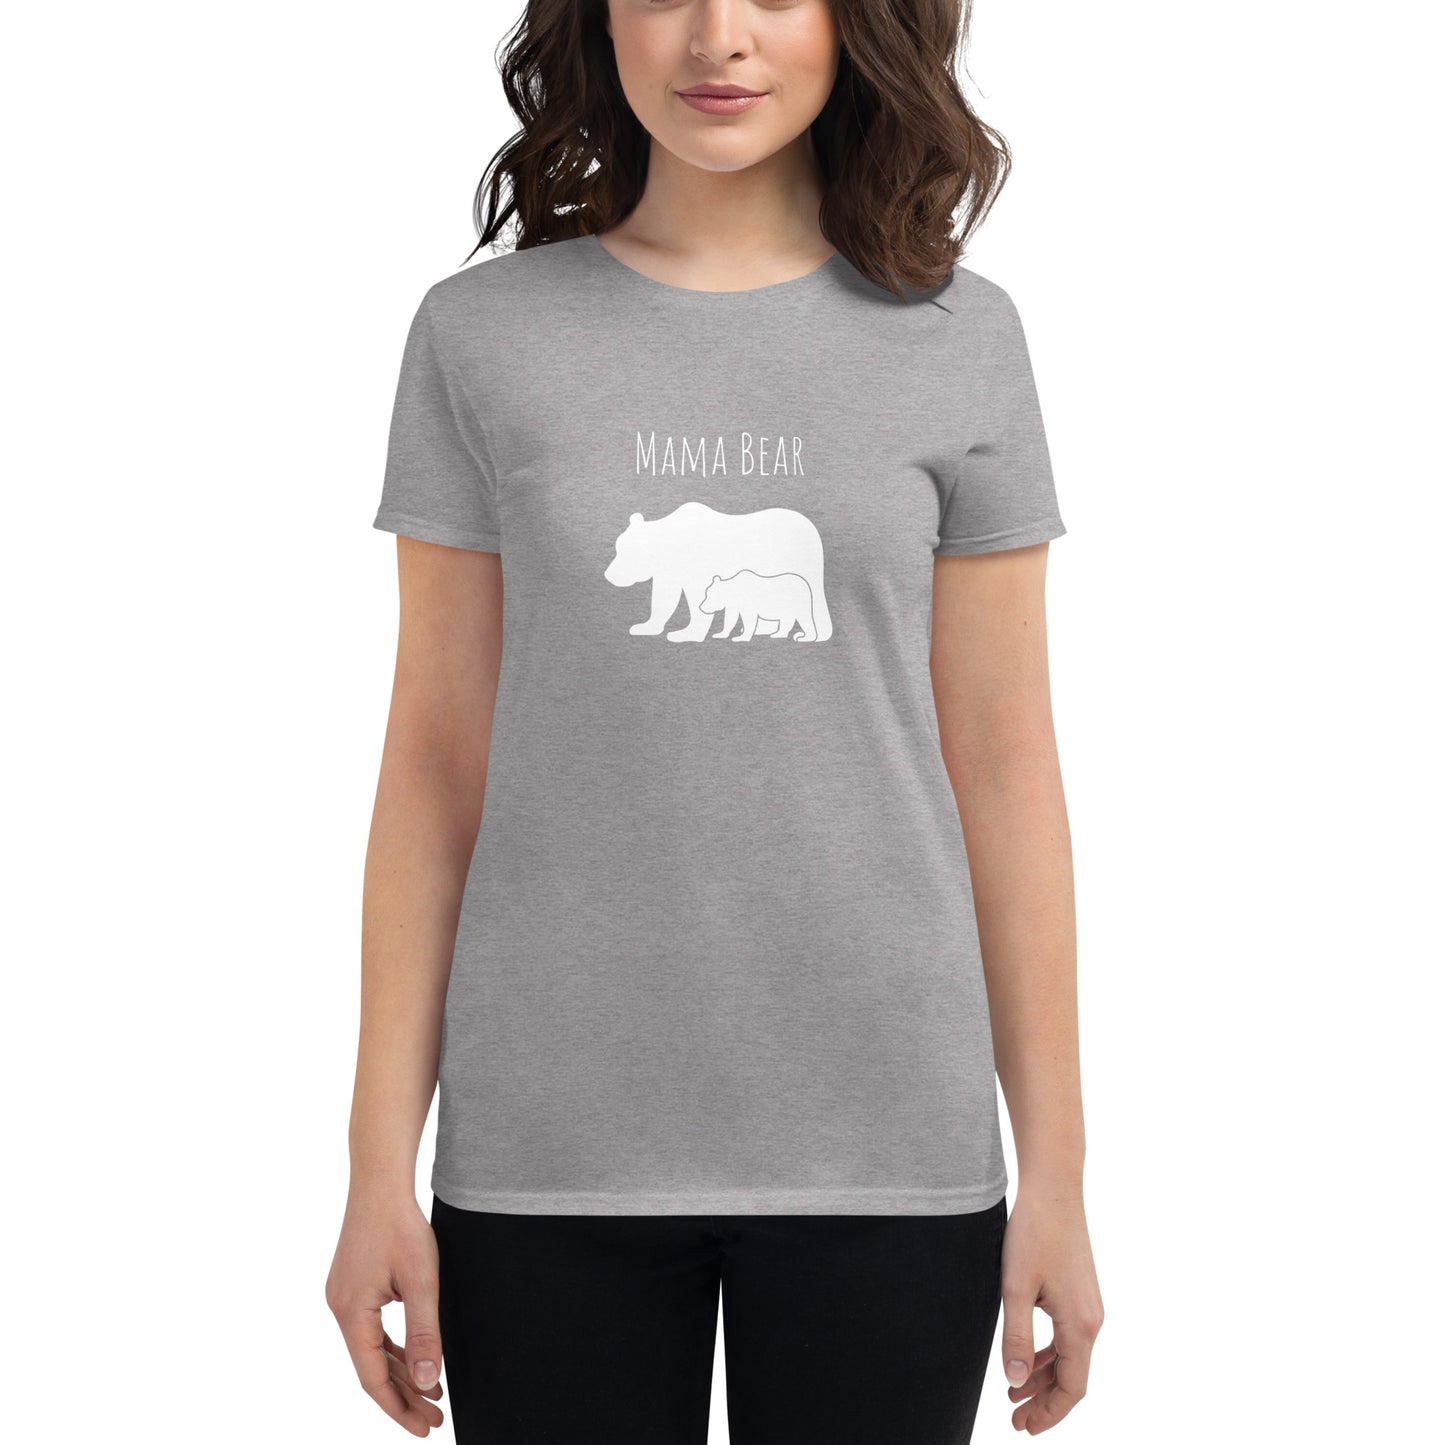 Mama Bear - Women's Short Sleeve T-Shirt - Available in 8 Colors